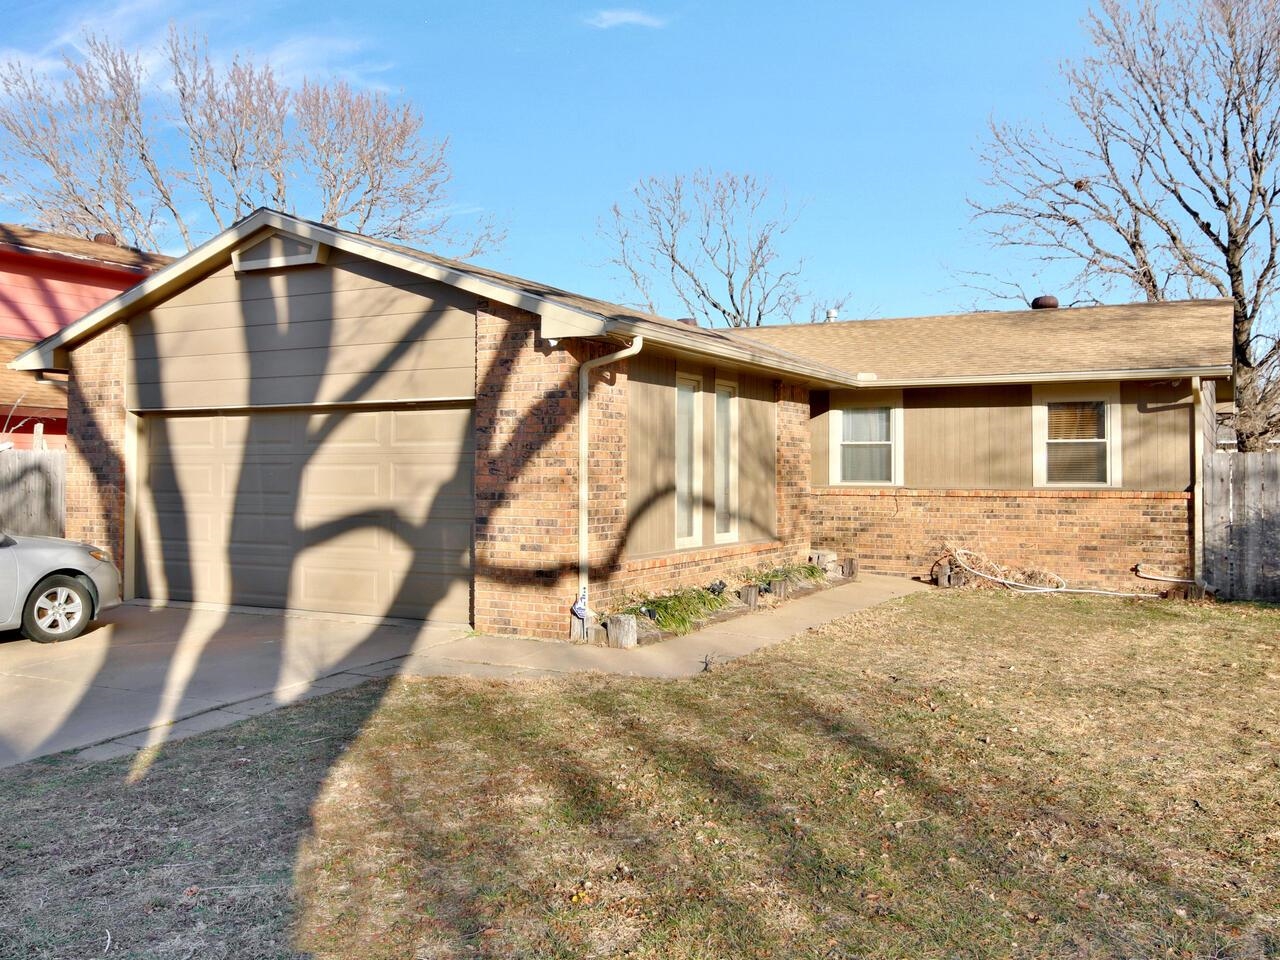 NEW on the market! This charming ranch style home is move-in ready and all appliances stay! 3 bedroo